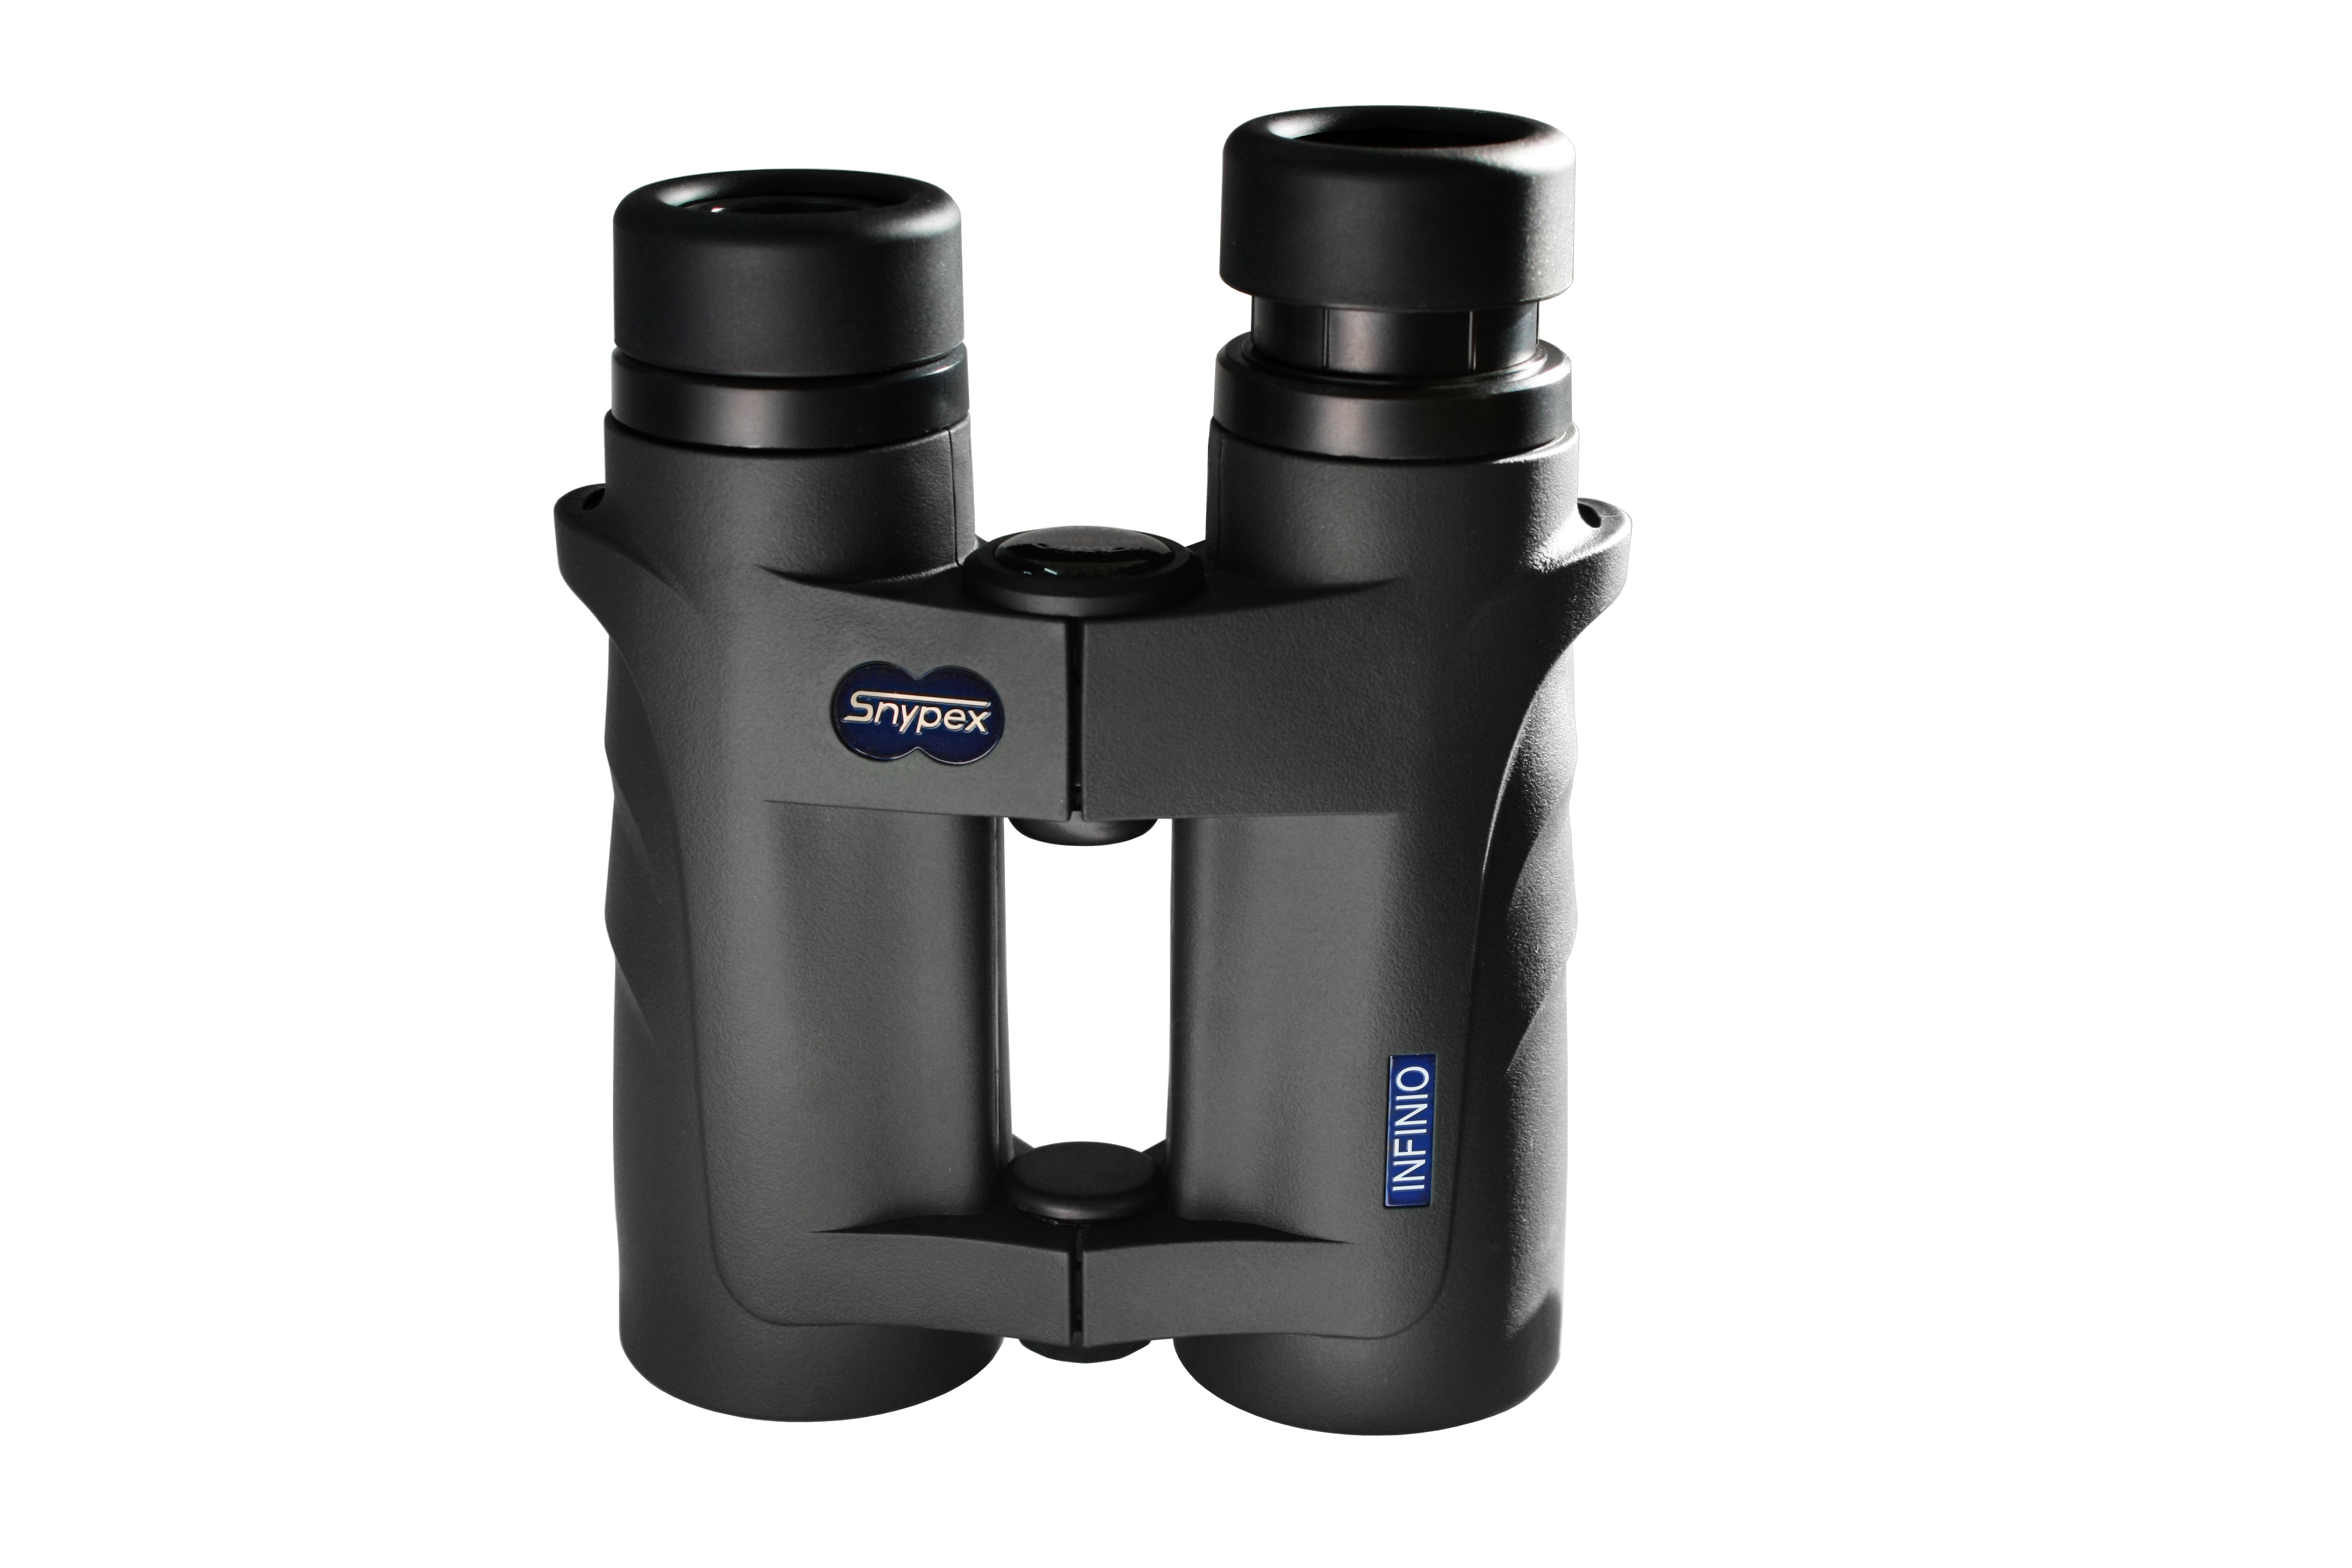 SNYPEX INFINIO 10X42 and 8x42 FOCUS FREE BINOCULARS FOR ALL OUTDOOR ACTIVITY, SPORTS EVENT, BOATING, RACING 